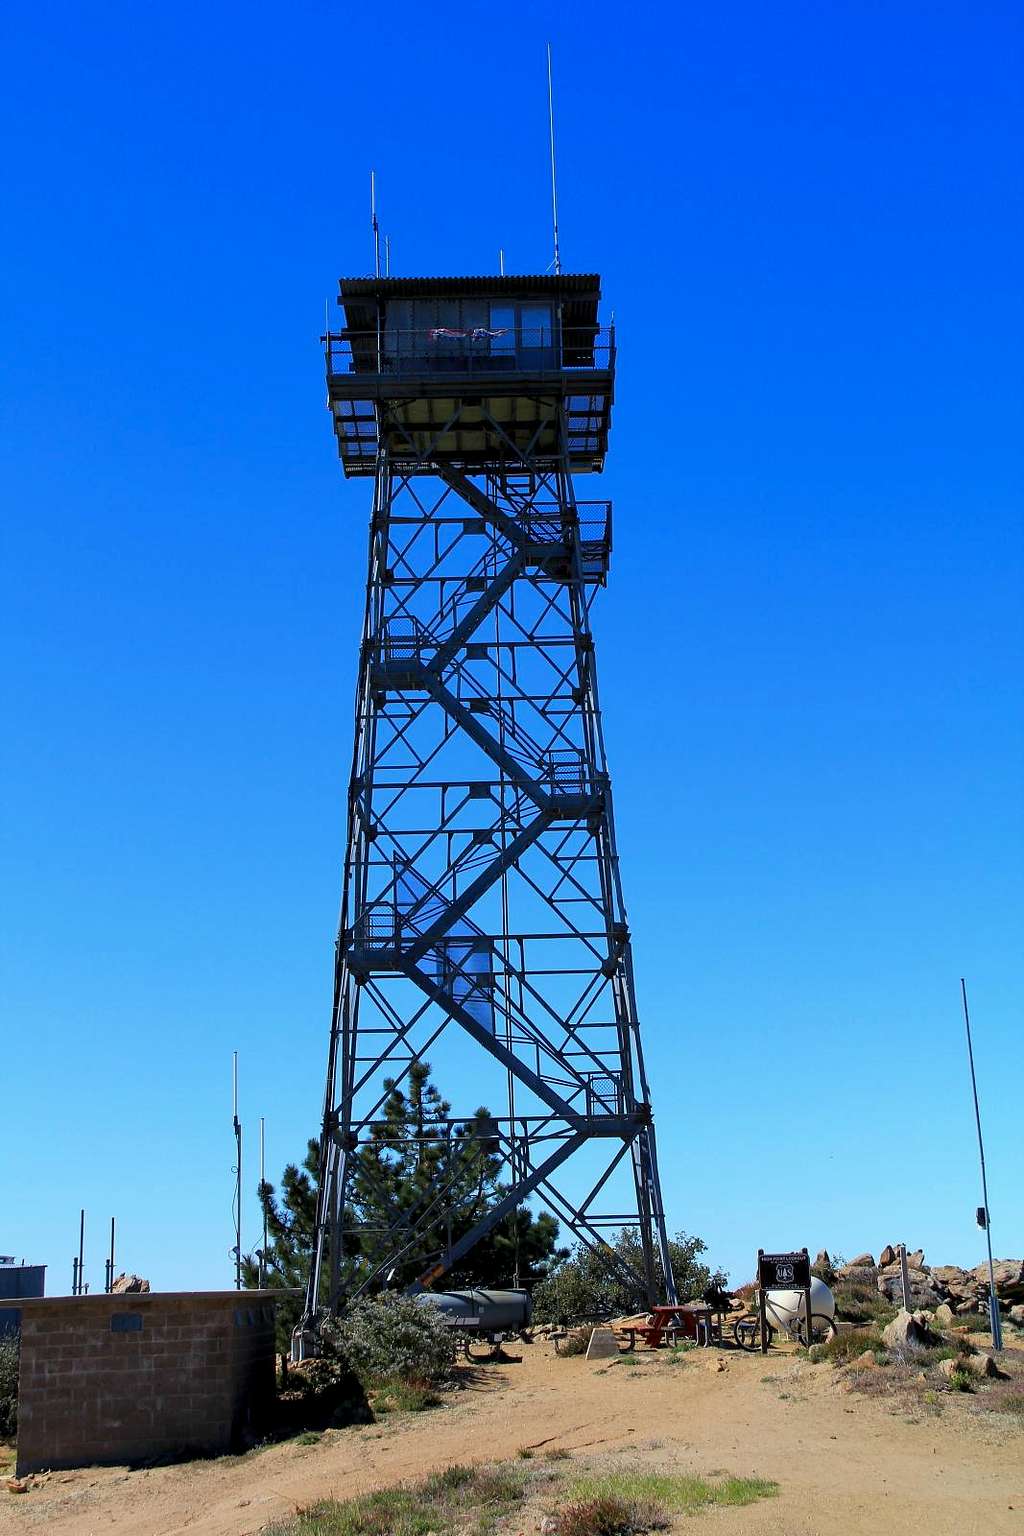 Lookout Tower at the Palomar Mountain highpoint.